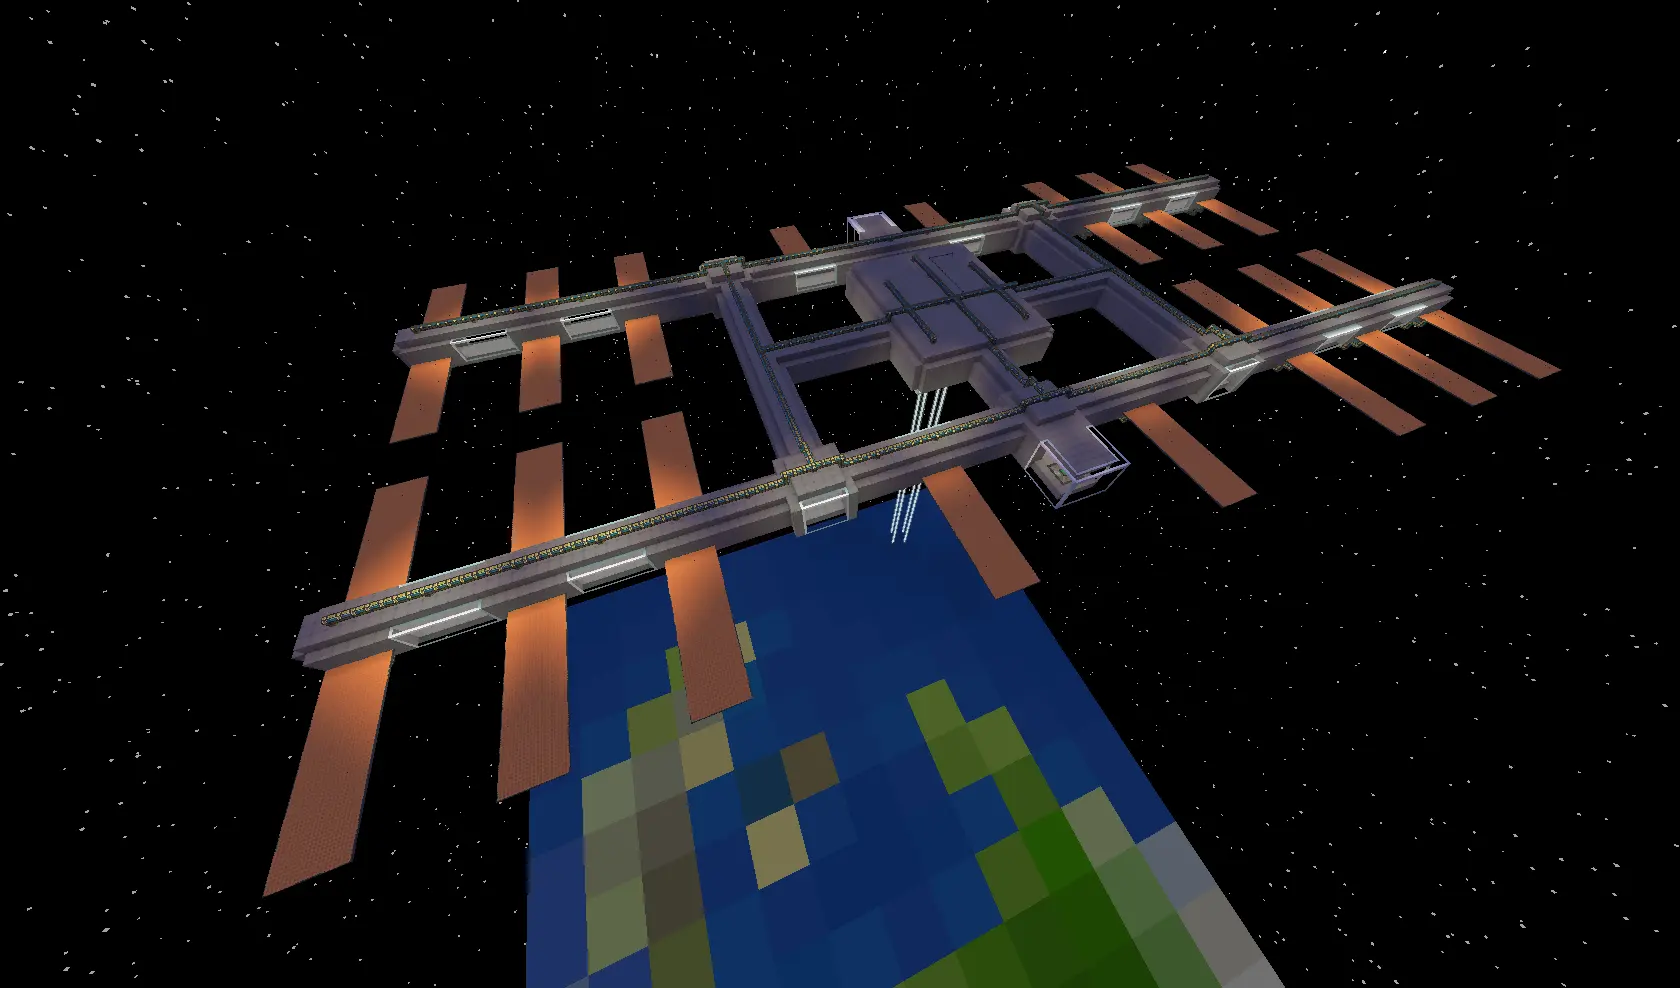 galacticraft advanced solar panel rf - What is the solar system in Galacticraft